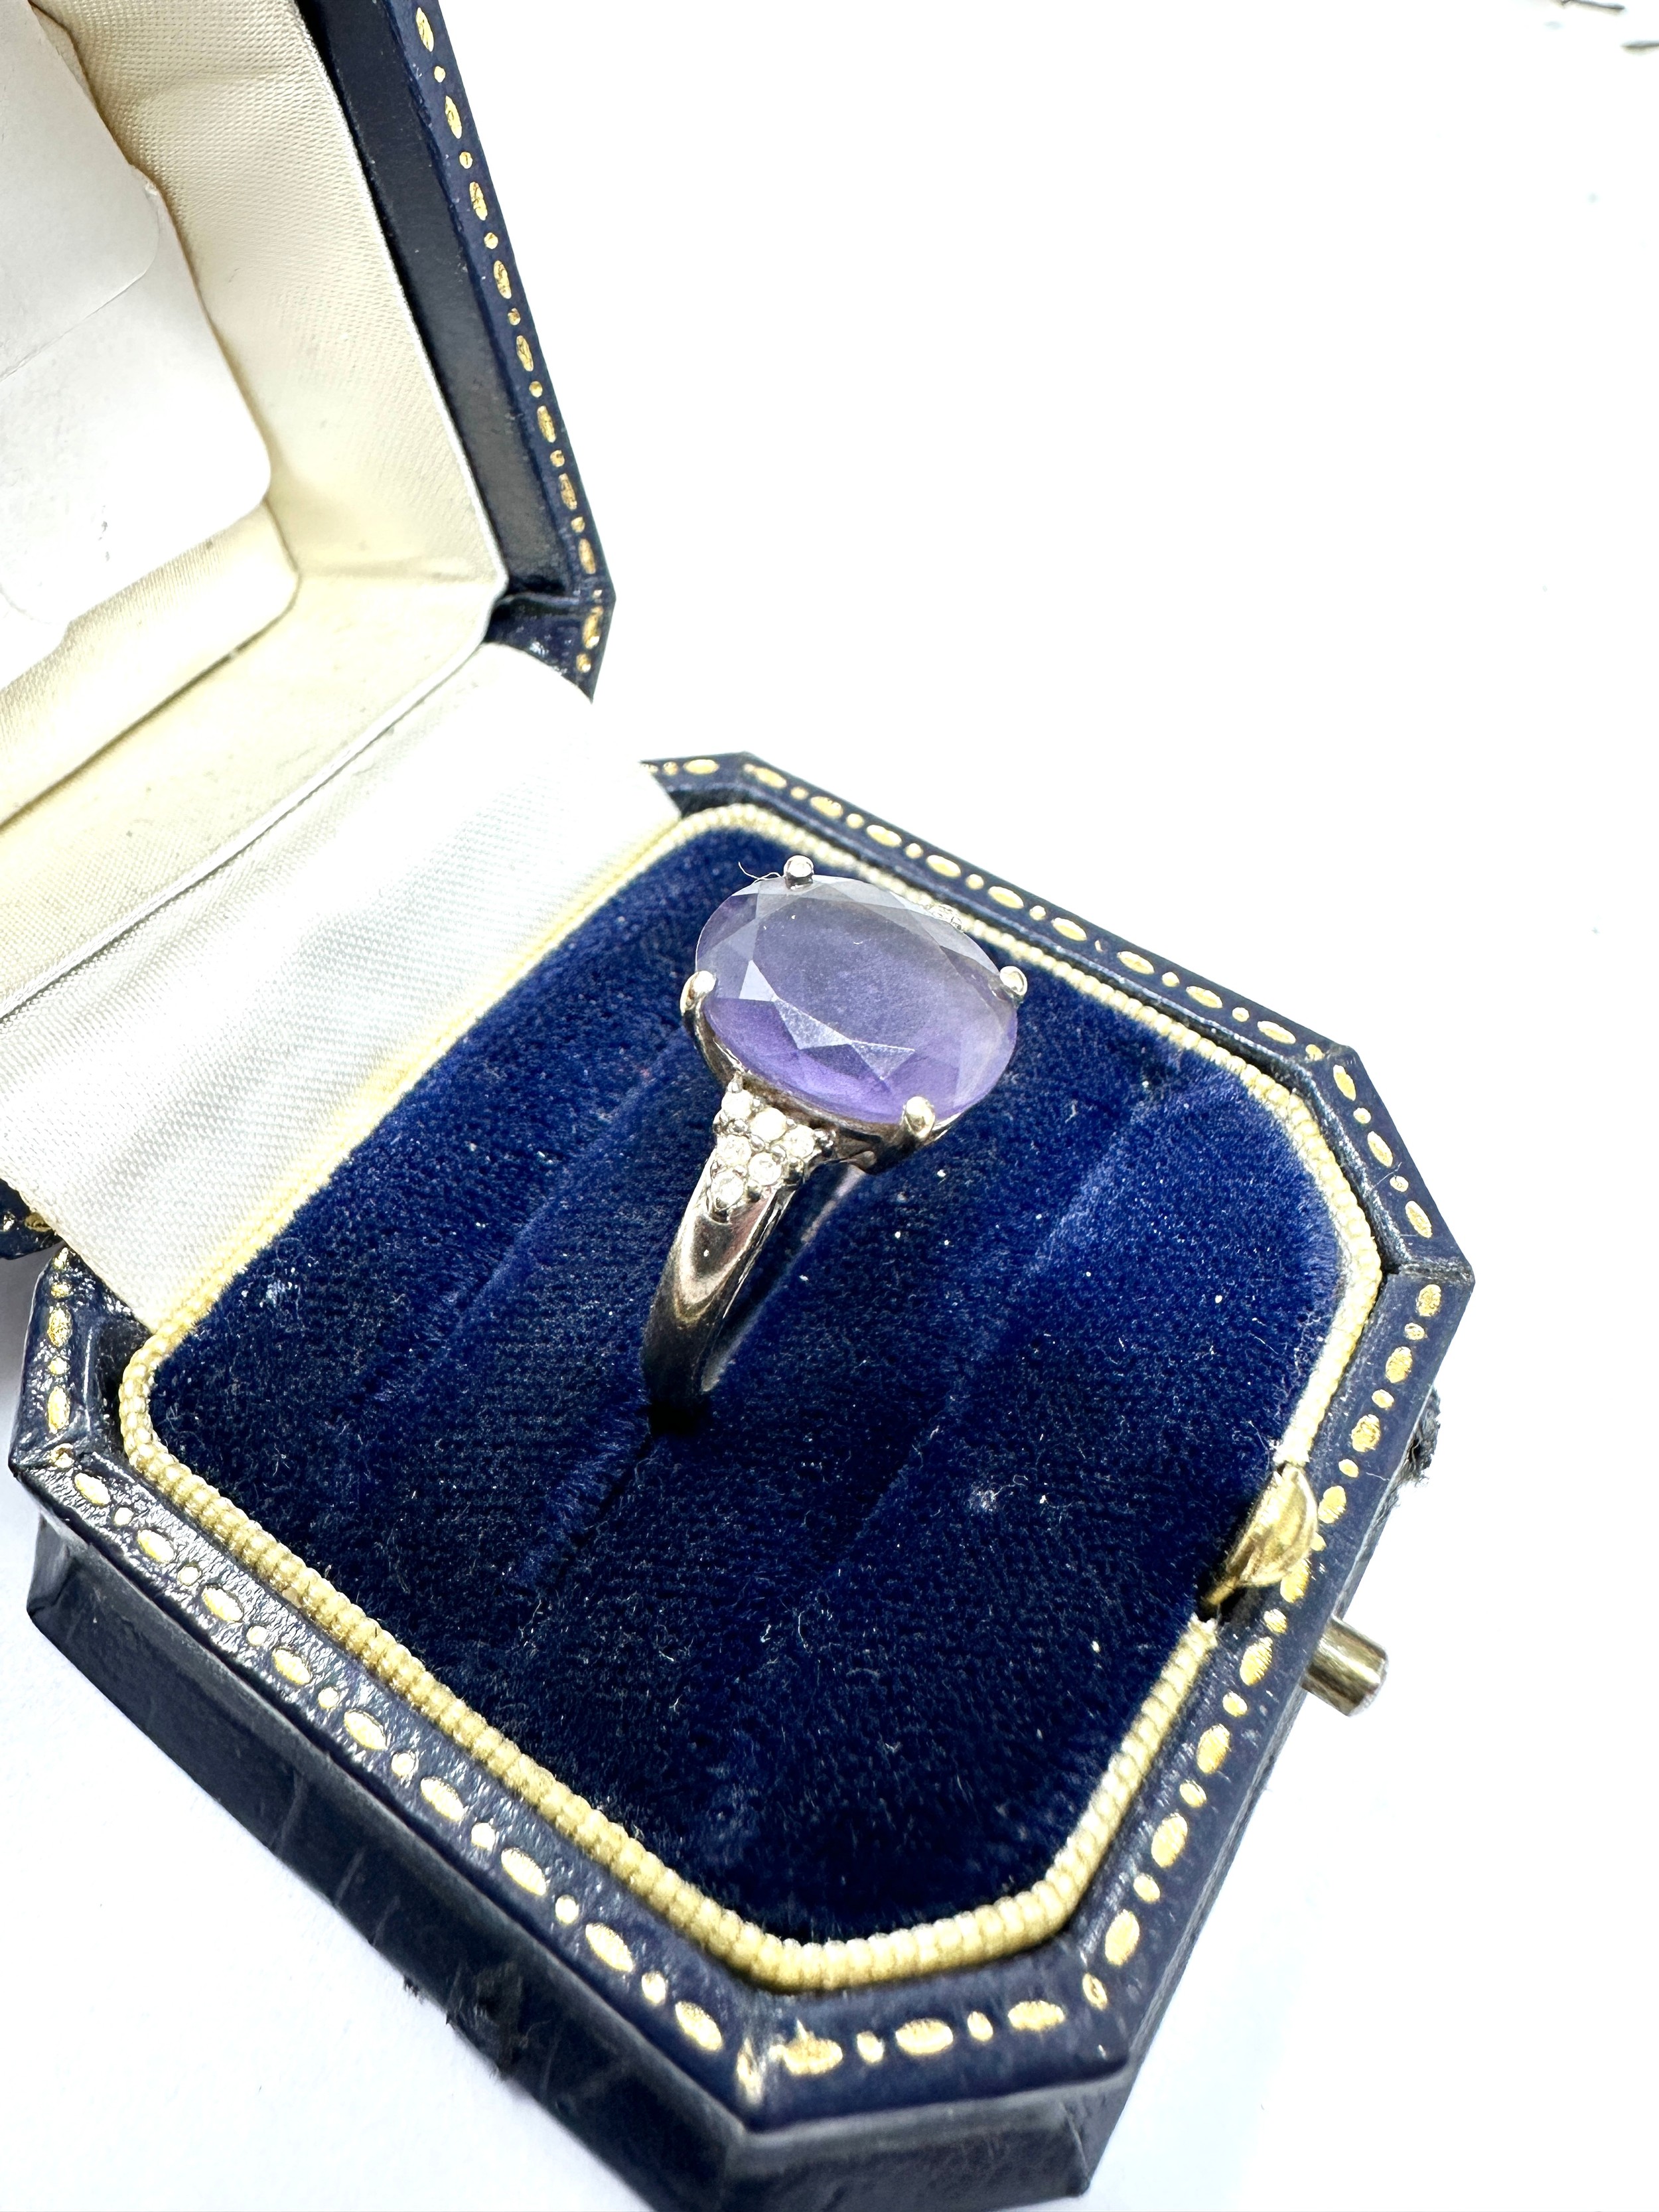 9ct white gold diamond and amethyst ring (3.6g) - Image 2 of 3